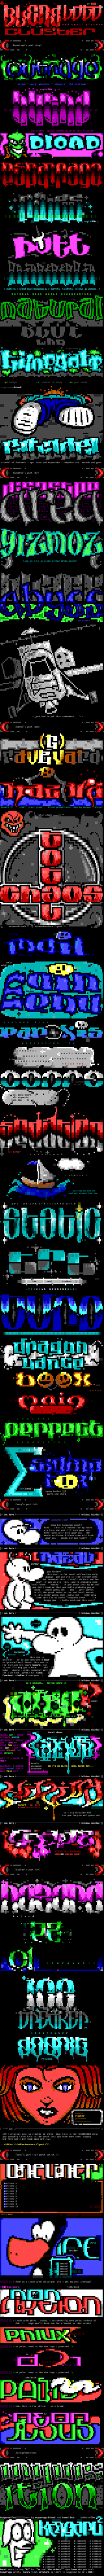 Ansi logo & small pics cluster by Multiple artists